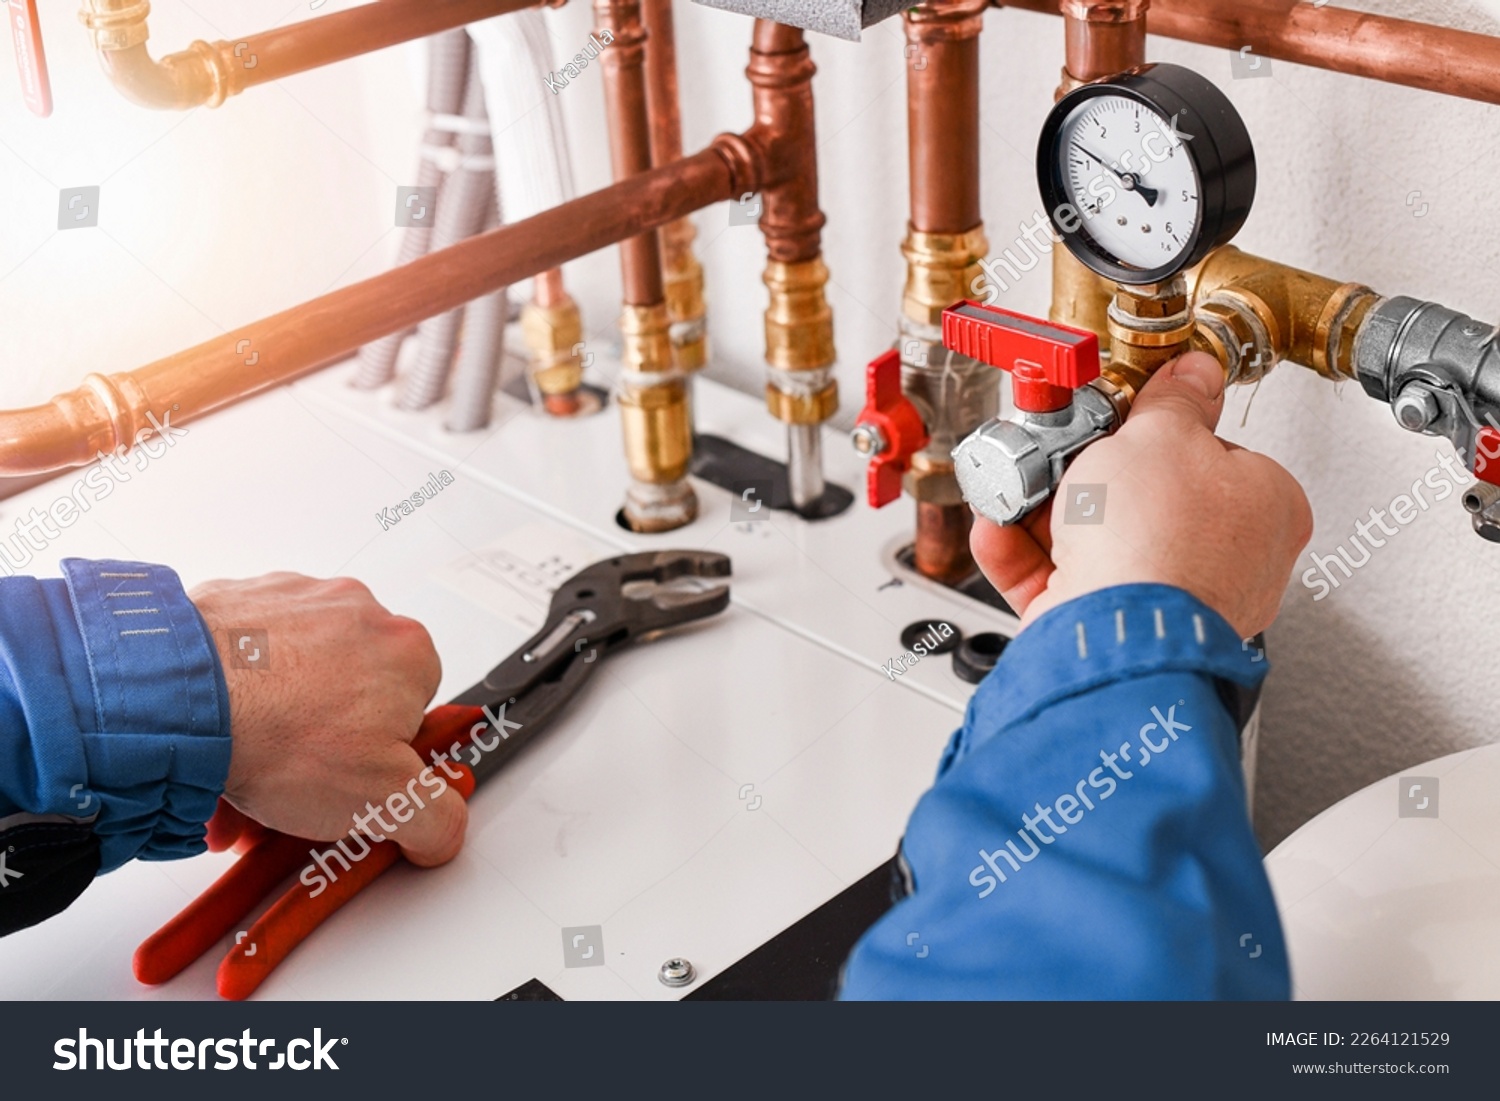 Plumbing concept or service water worker. copper pipeline of a heating system in technical room. Boiler and expansion expansion tank system, detail of pressure gauge. #2264121529